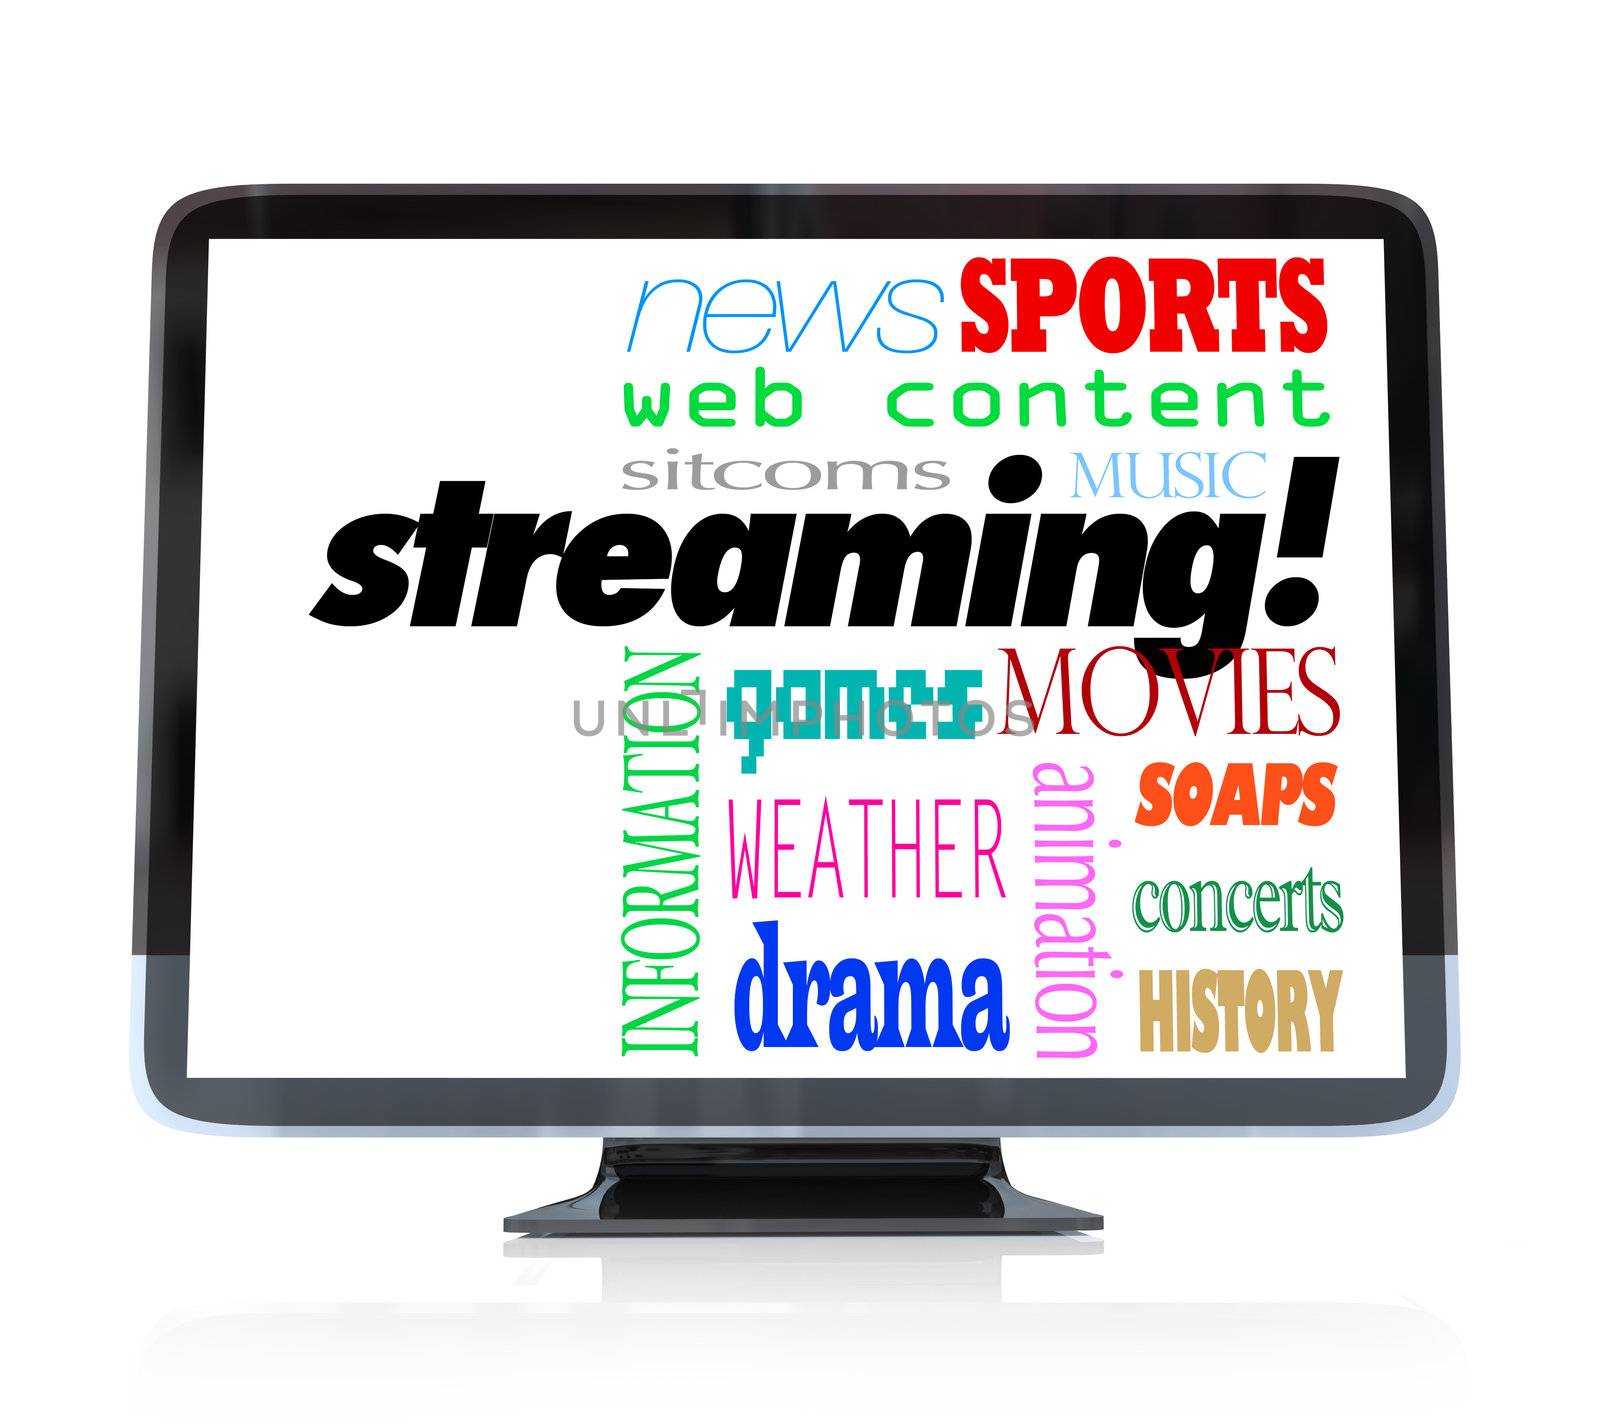 A high definition television with the word Streaming and words for types of content you can watch such as movies, sitcoms, dramas, sports, weather, news, information, concerts, music,  and more